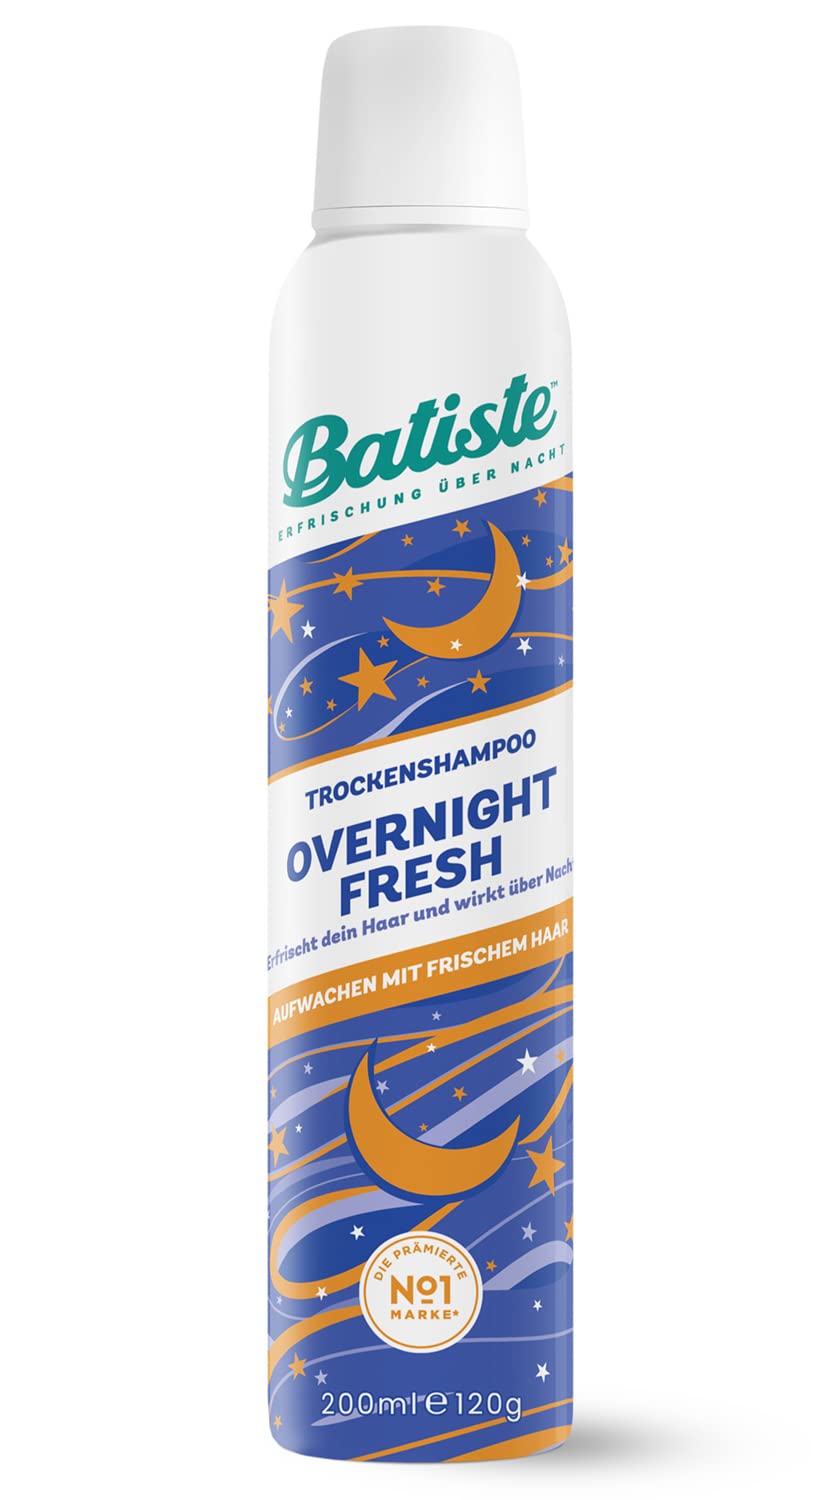 Batiste Overnight Fresh Dry Shampoo 200 ml, Dry Shampoo for Refreshing and Styling Hair, Hair Styling Spray without Rinse, Hair Cleansing Overnight, ‎clear